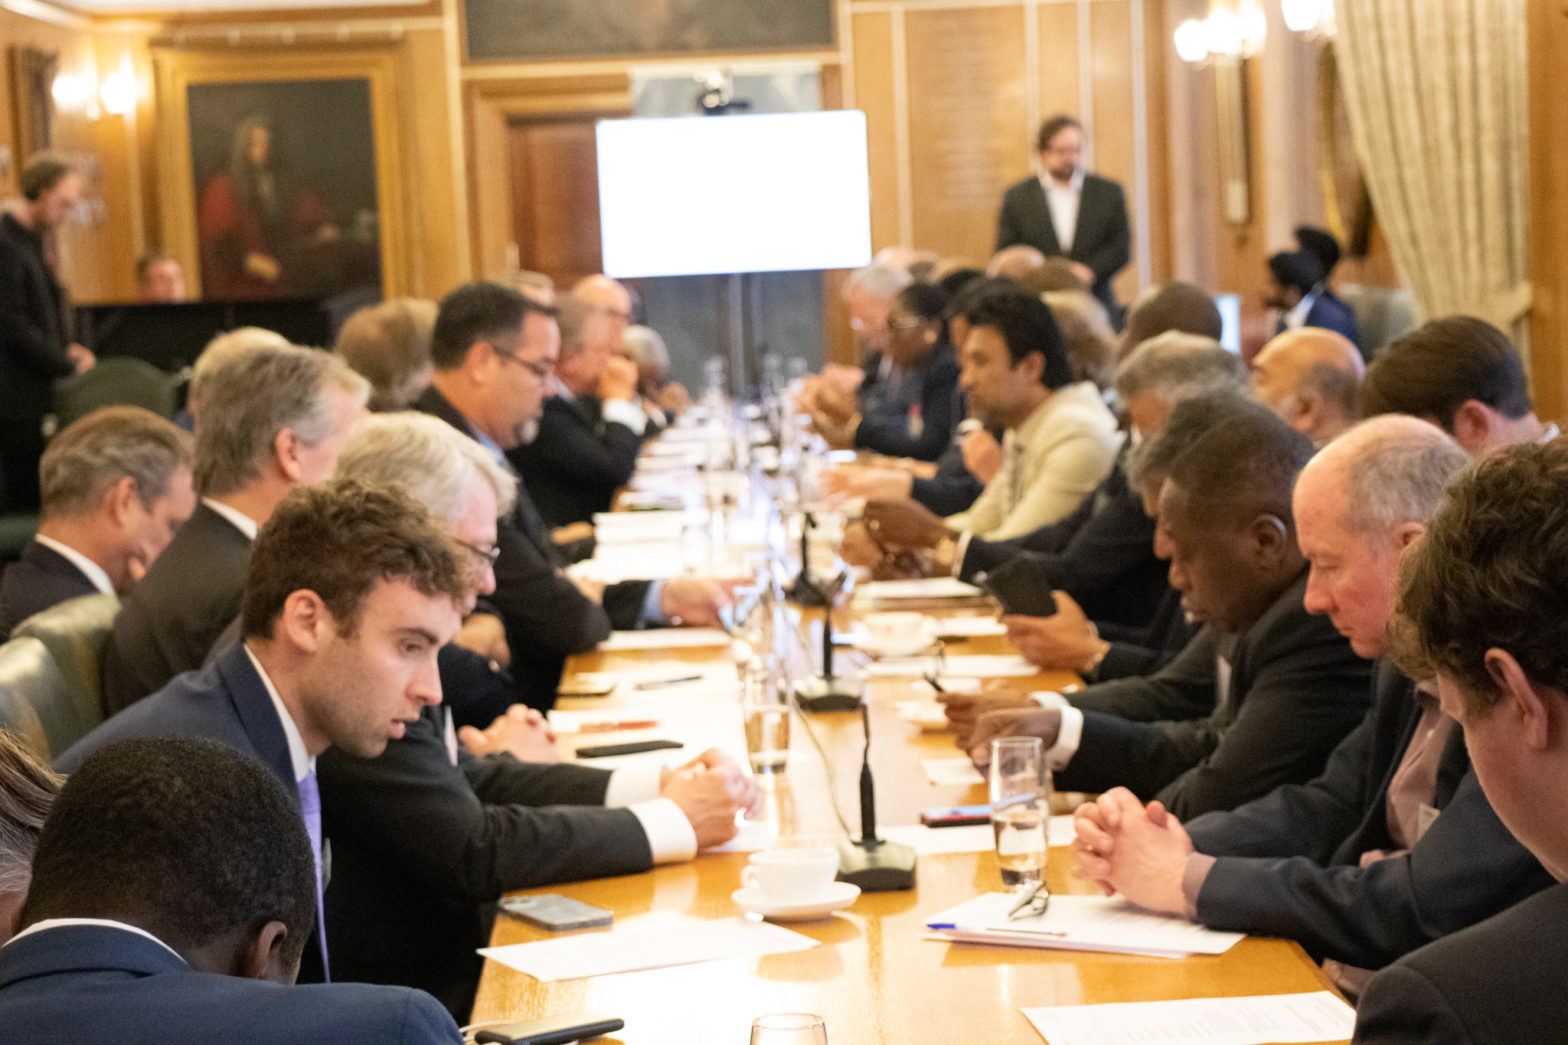 Second Global Advisory Council meeting convened at the Old Bailey